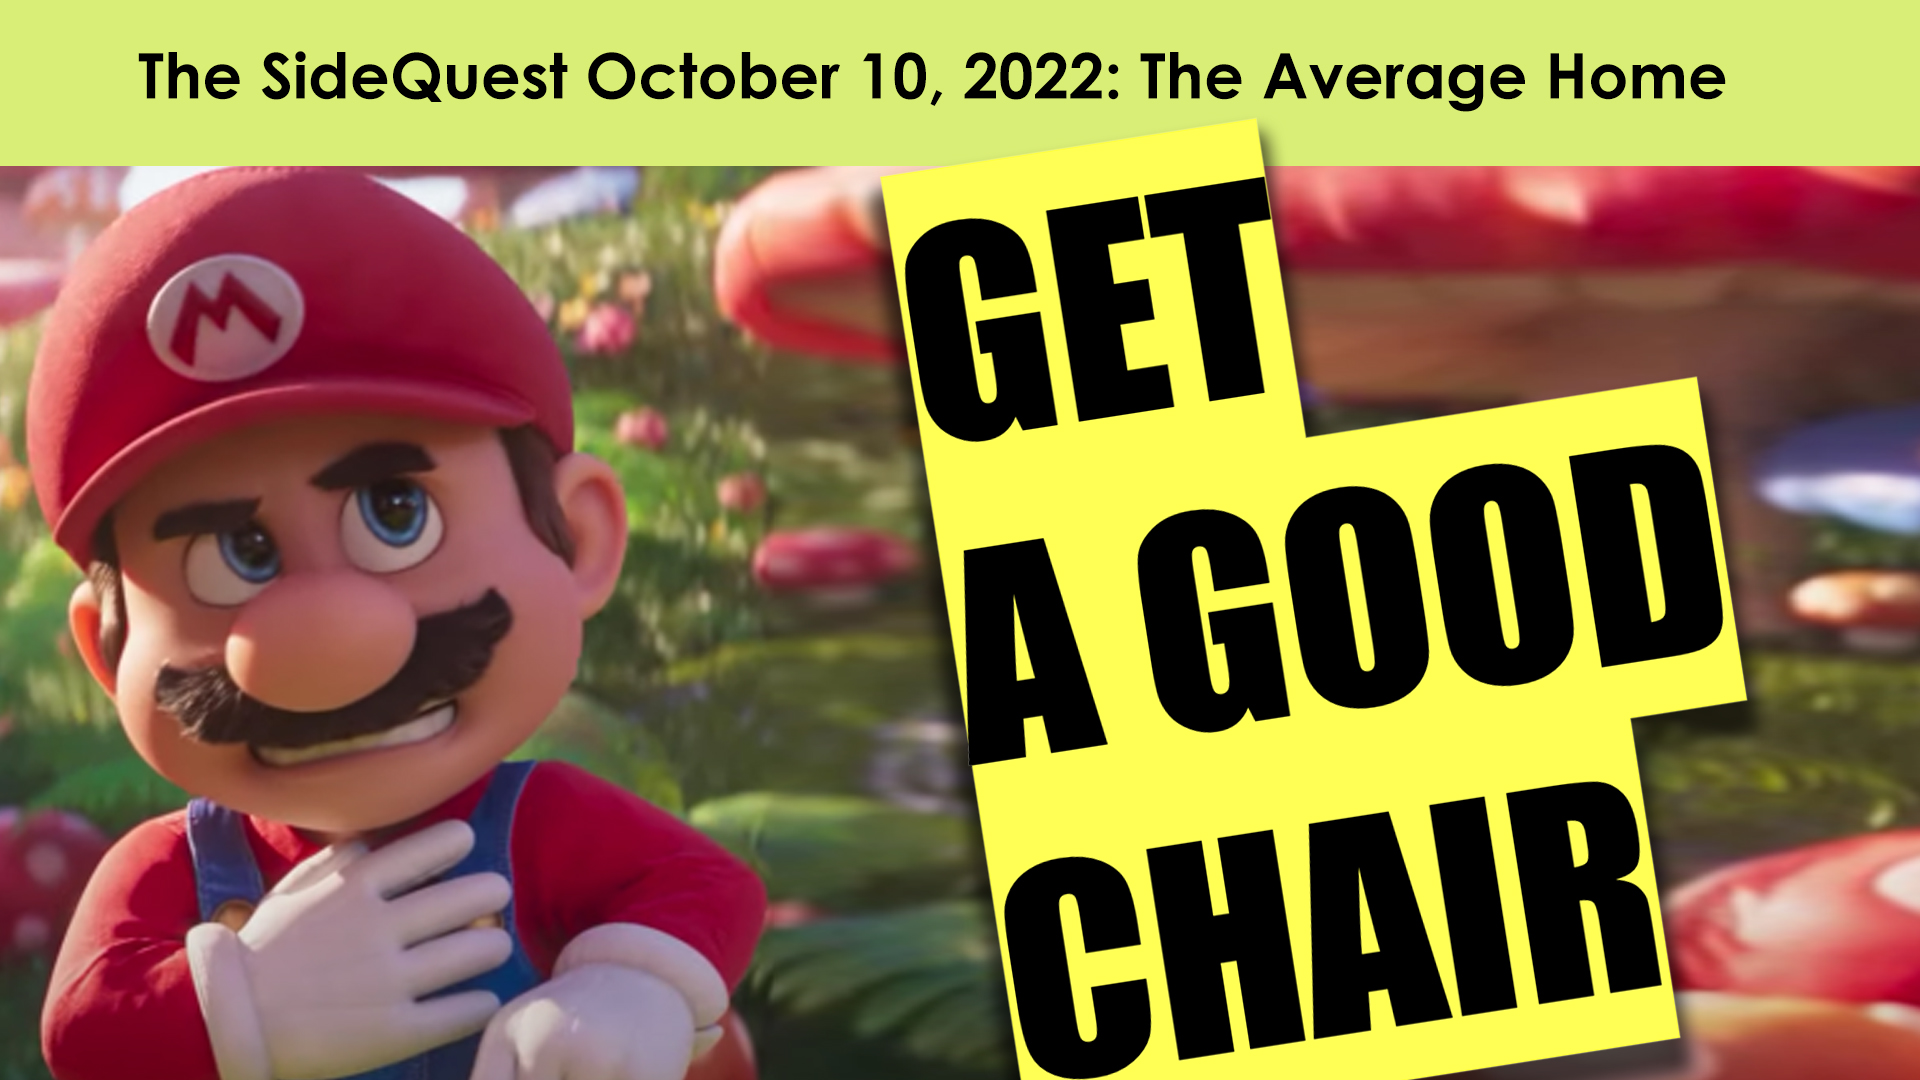 The SideQuest LIVE! October 10, 2022: Your Average Home